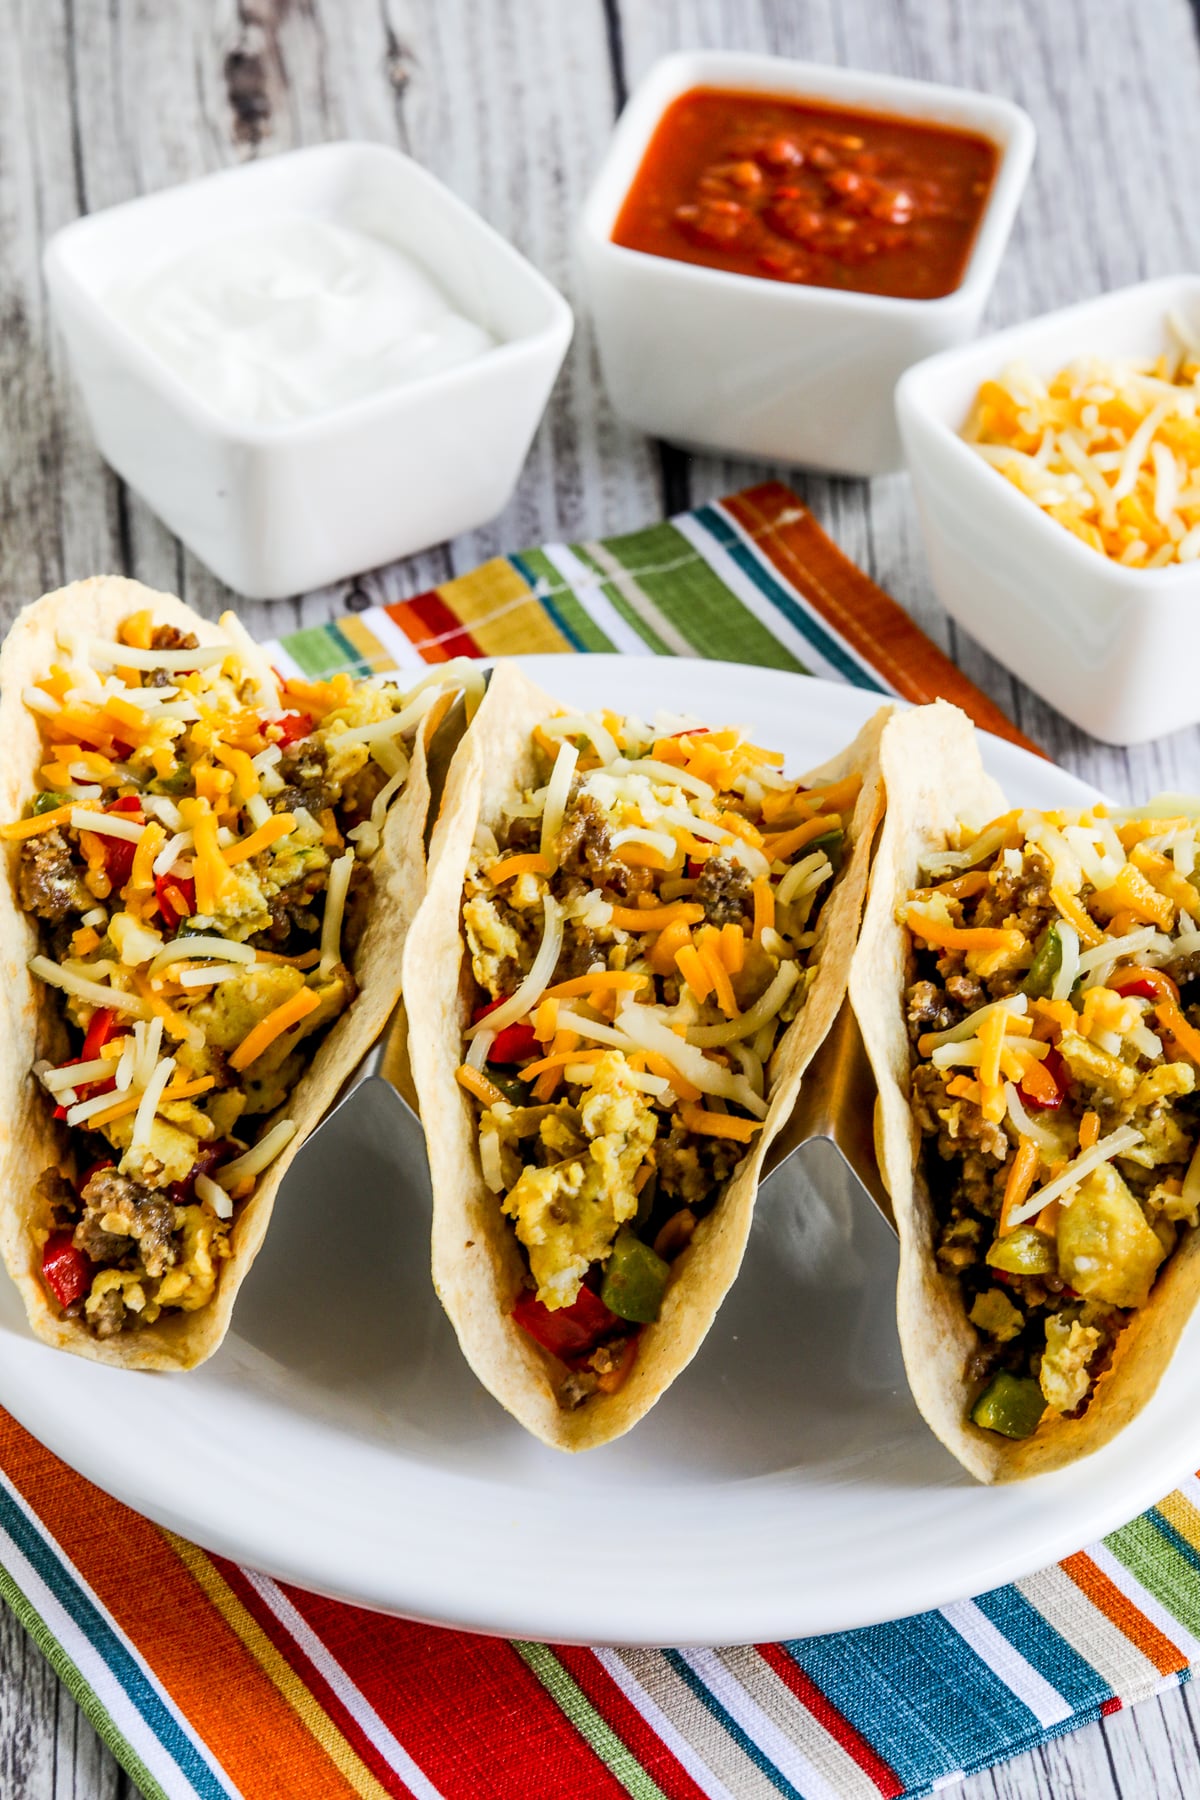 Low-Carb Breakfast Tacos Recipe shown with three tacos in holder on plate.